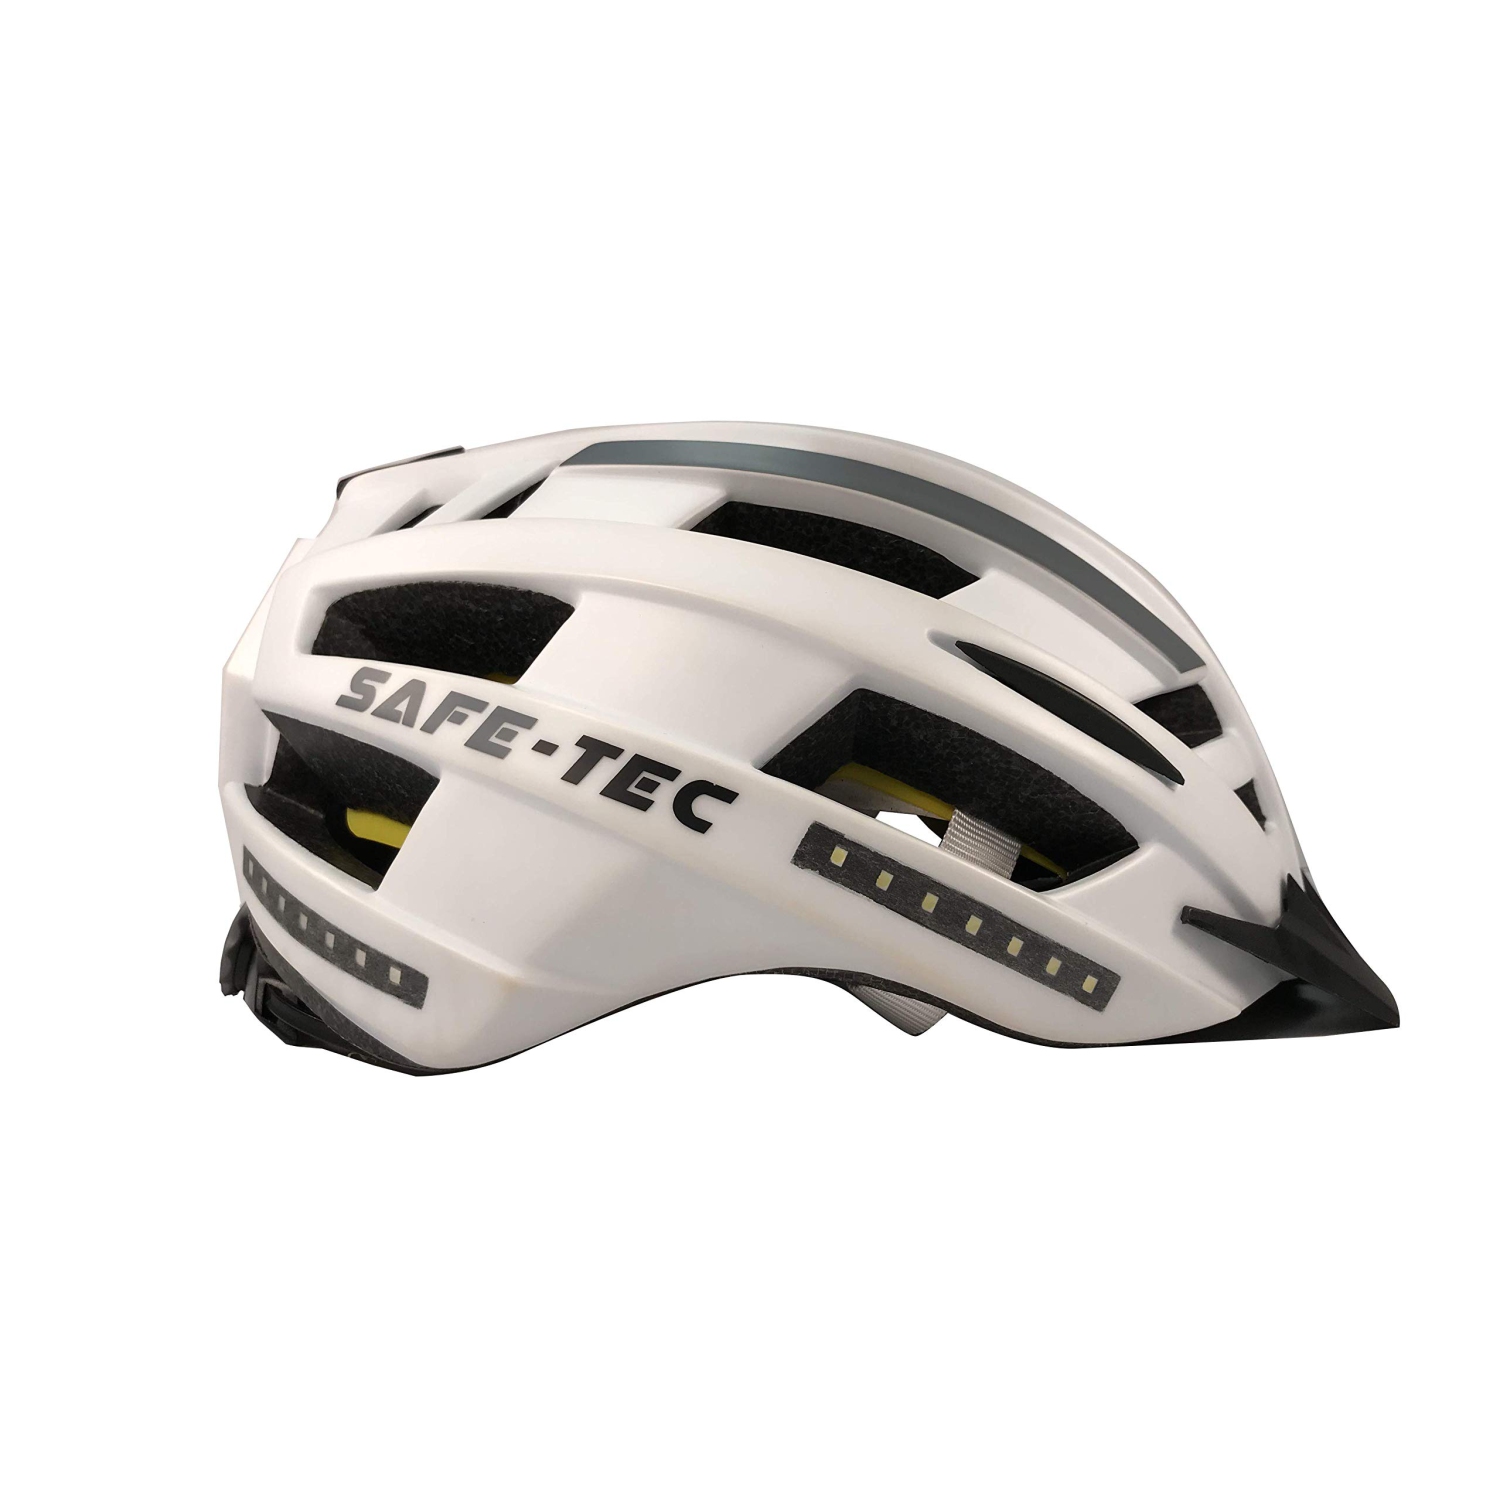 Safe-Tec Asgard Bicycle Smart Helmet with MIPS & Turn Signals and Bone Conduction Speakers (White Silver, Large)